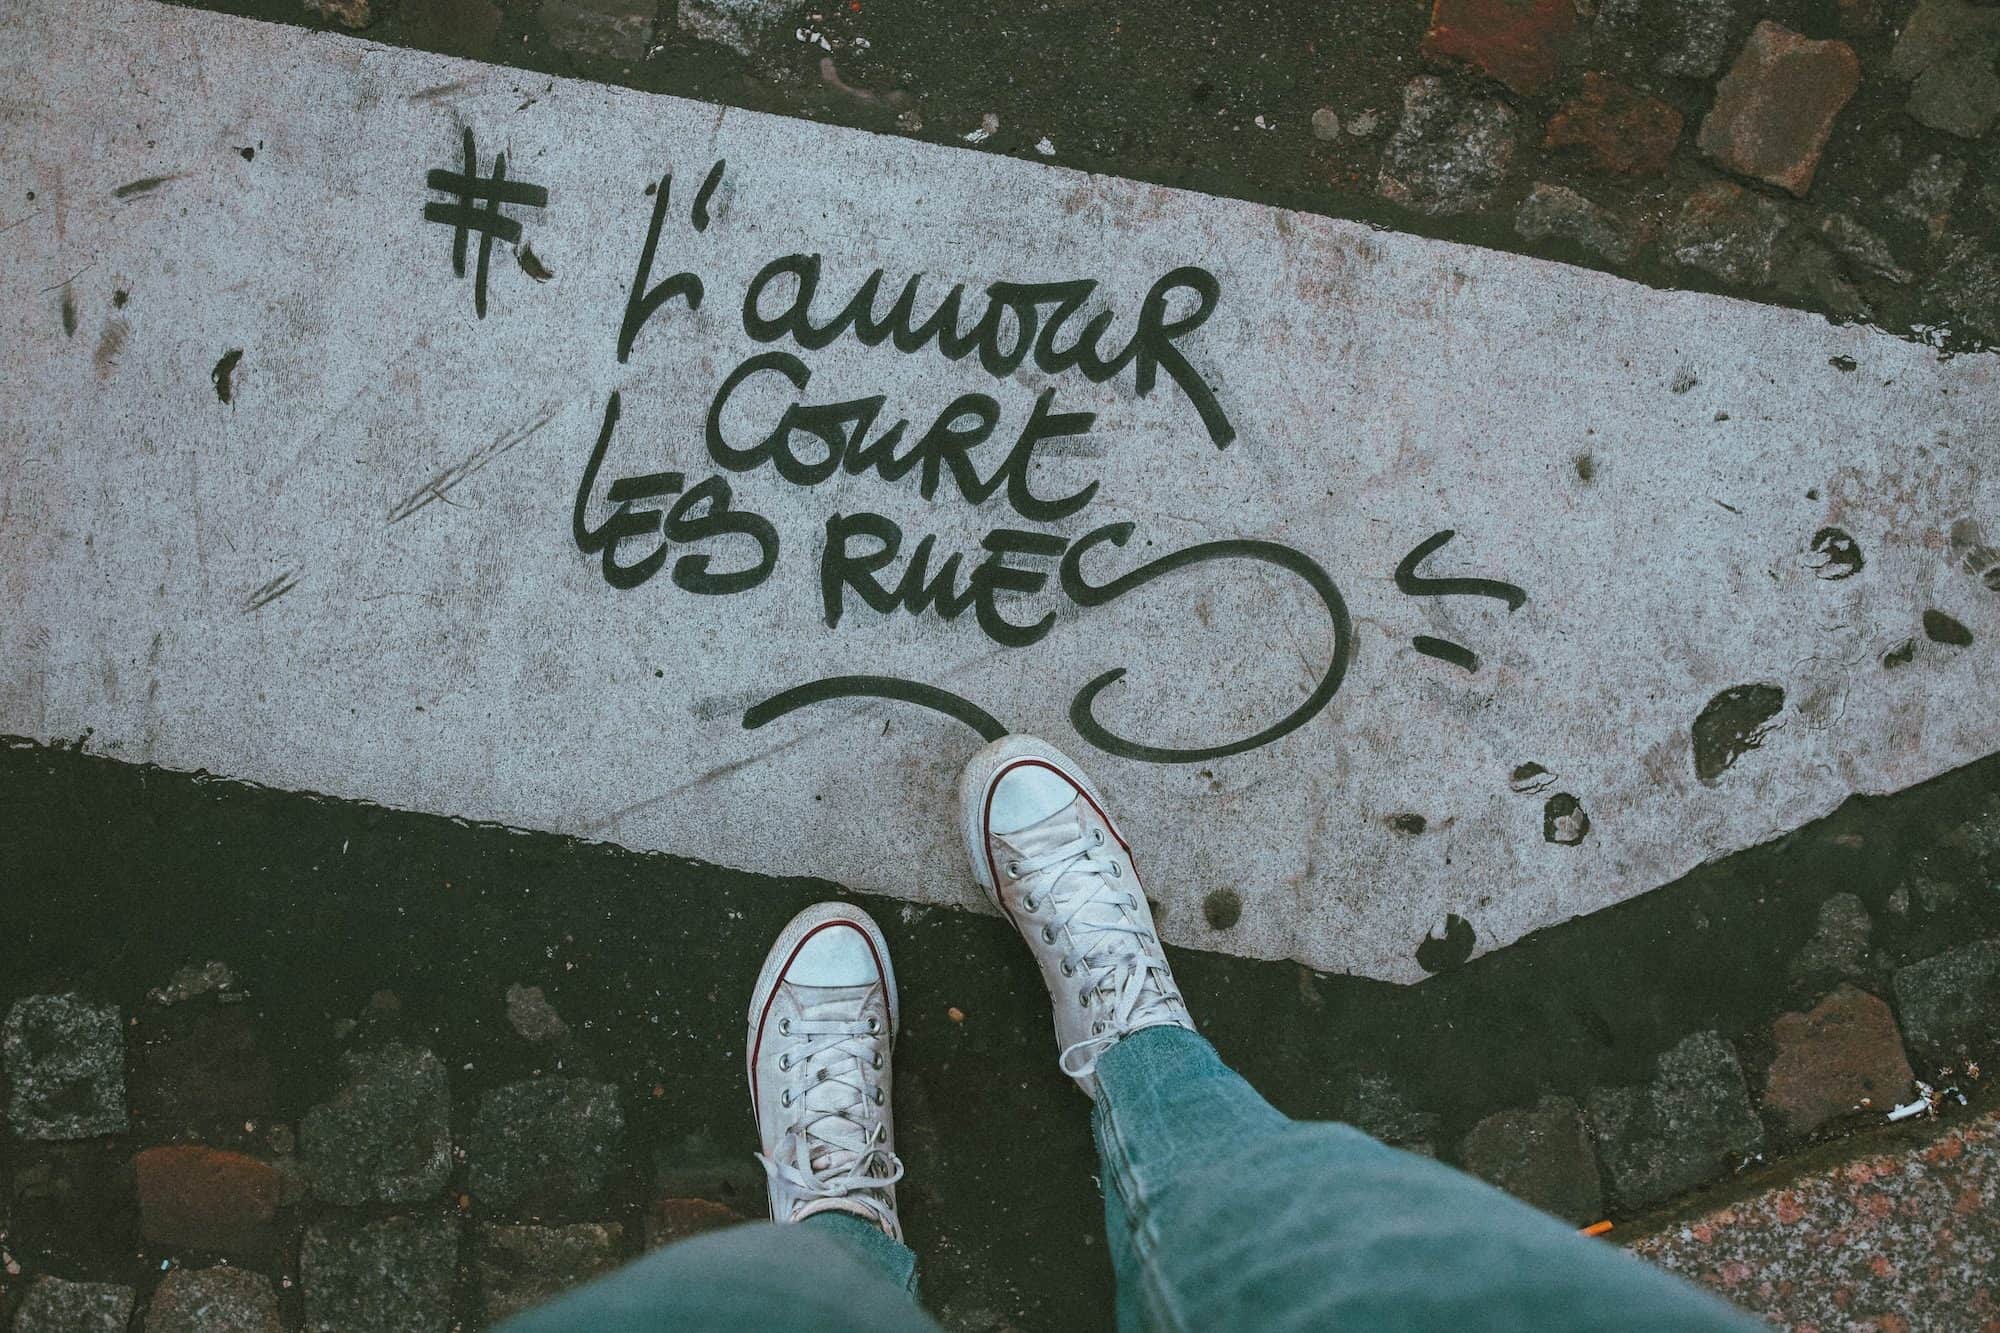 'L'Amour court les rues' (love flows through the streets) inscribed on a zebra crossing, which is a slogan that can now be found all over the city. 